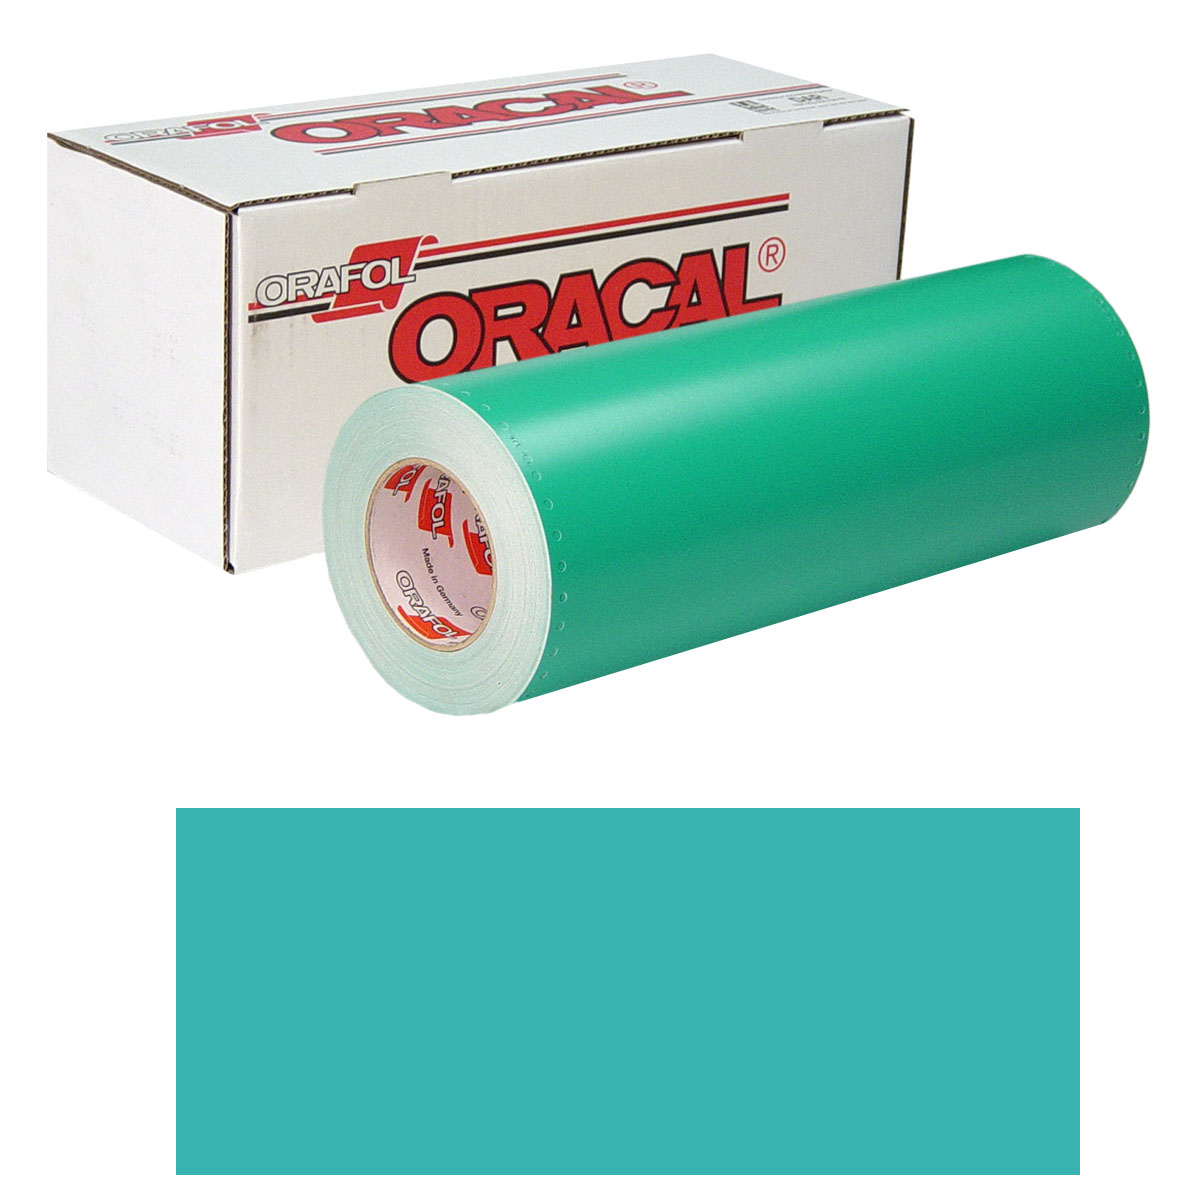 ORACAL 8500 15in X 50yd 054 Turquoise